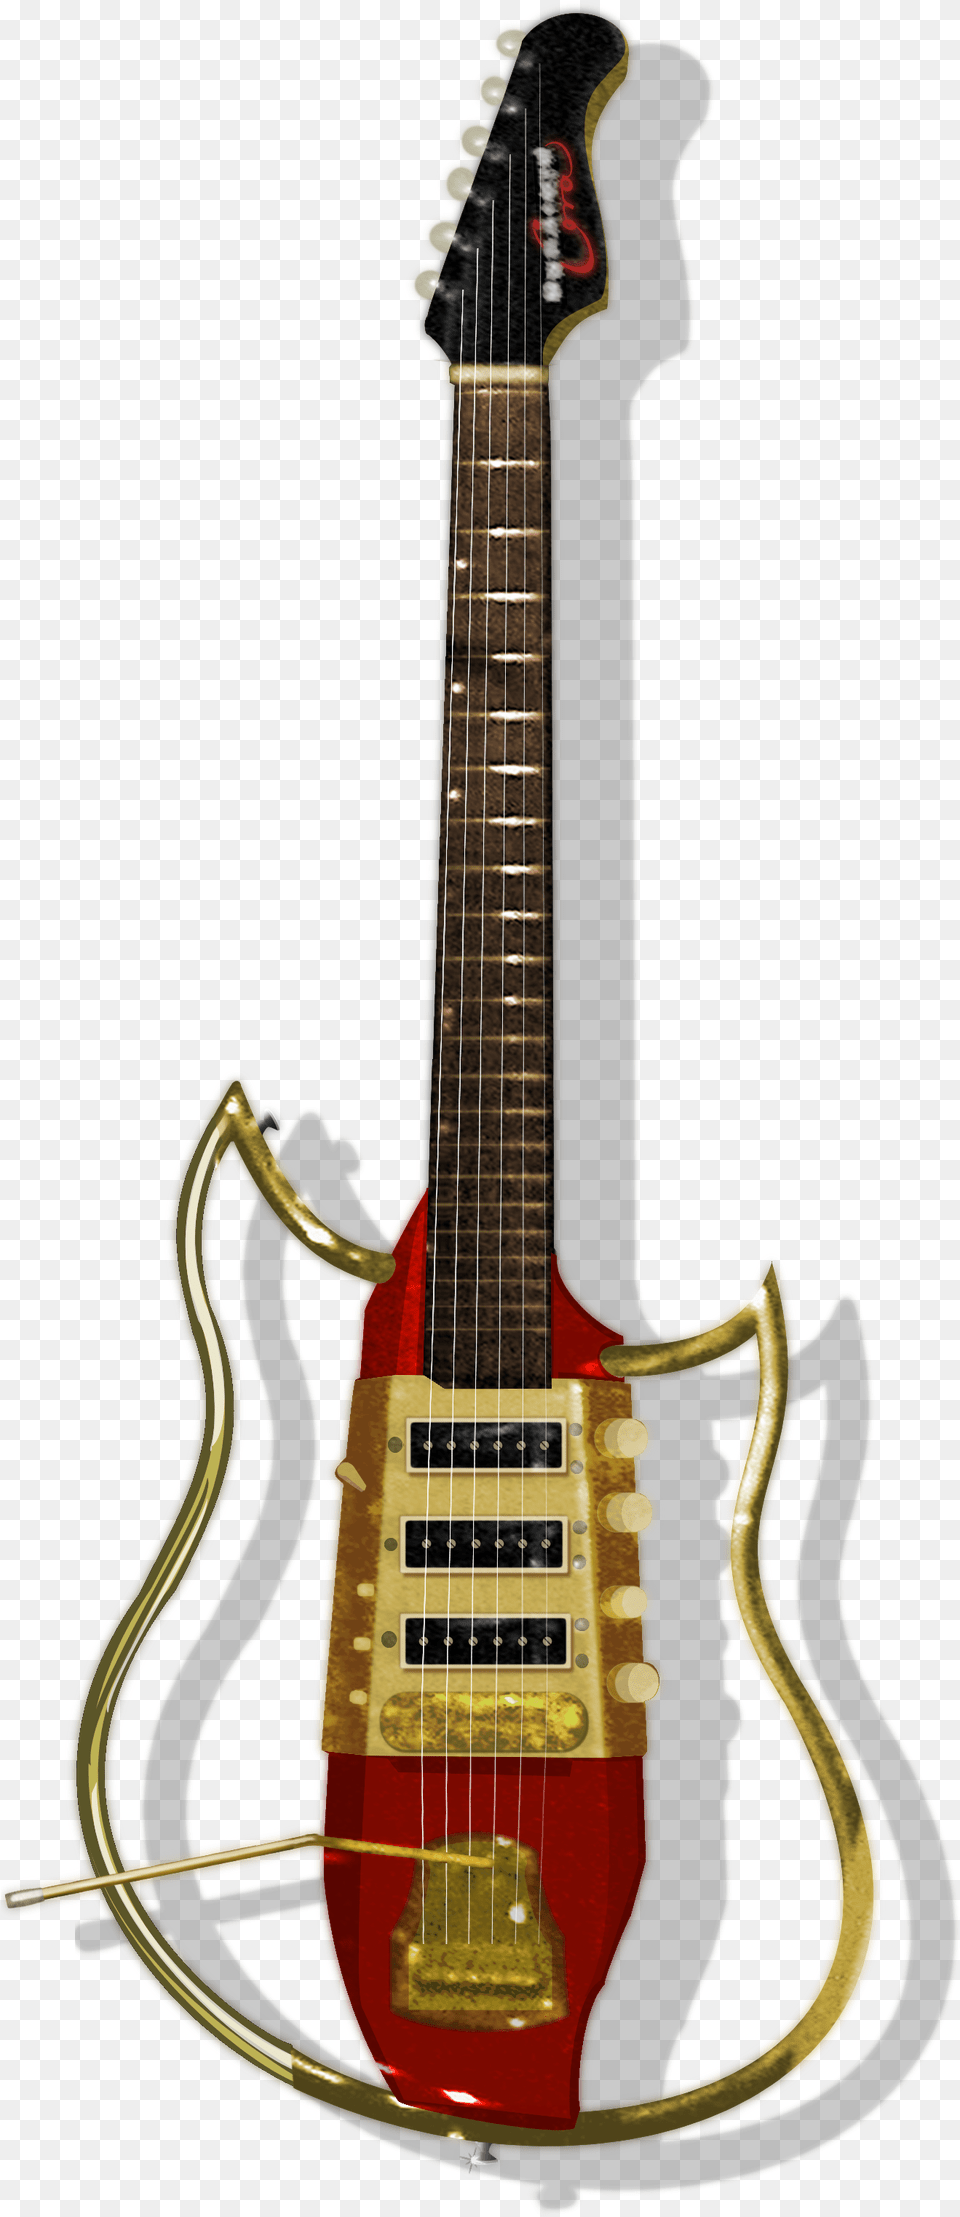 Dynacord Cora Electric Guitar, Musical Instrument, Electric Guitar, Bass Guitar Free Png